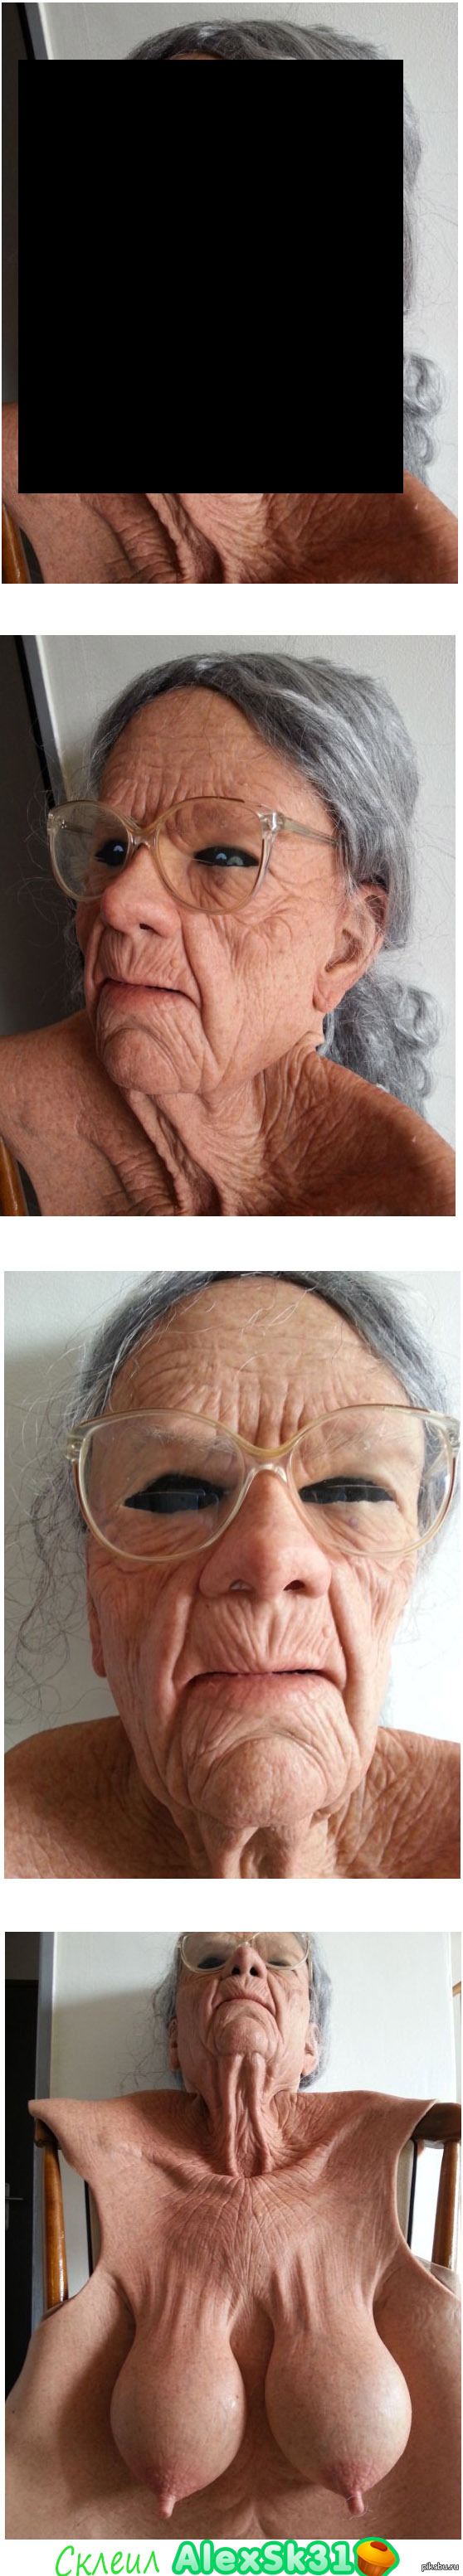 The coolest mask - NSFW, Mask, Longpost, Old woman, Boobs